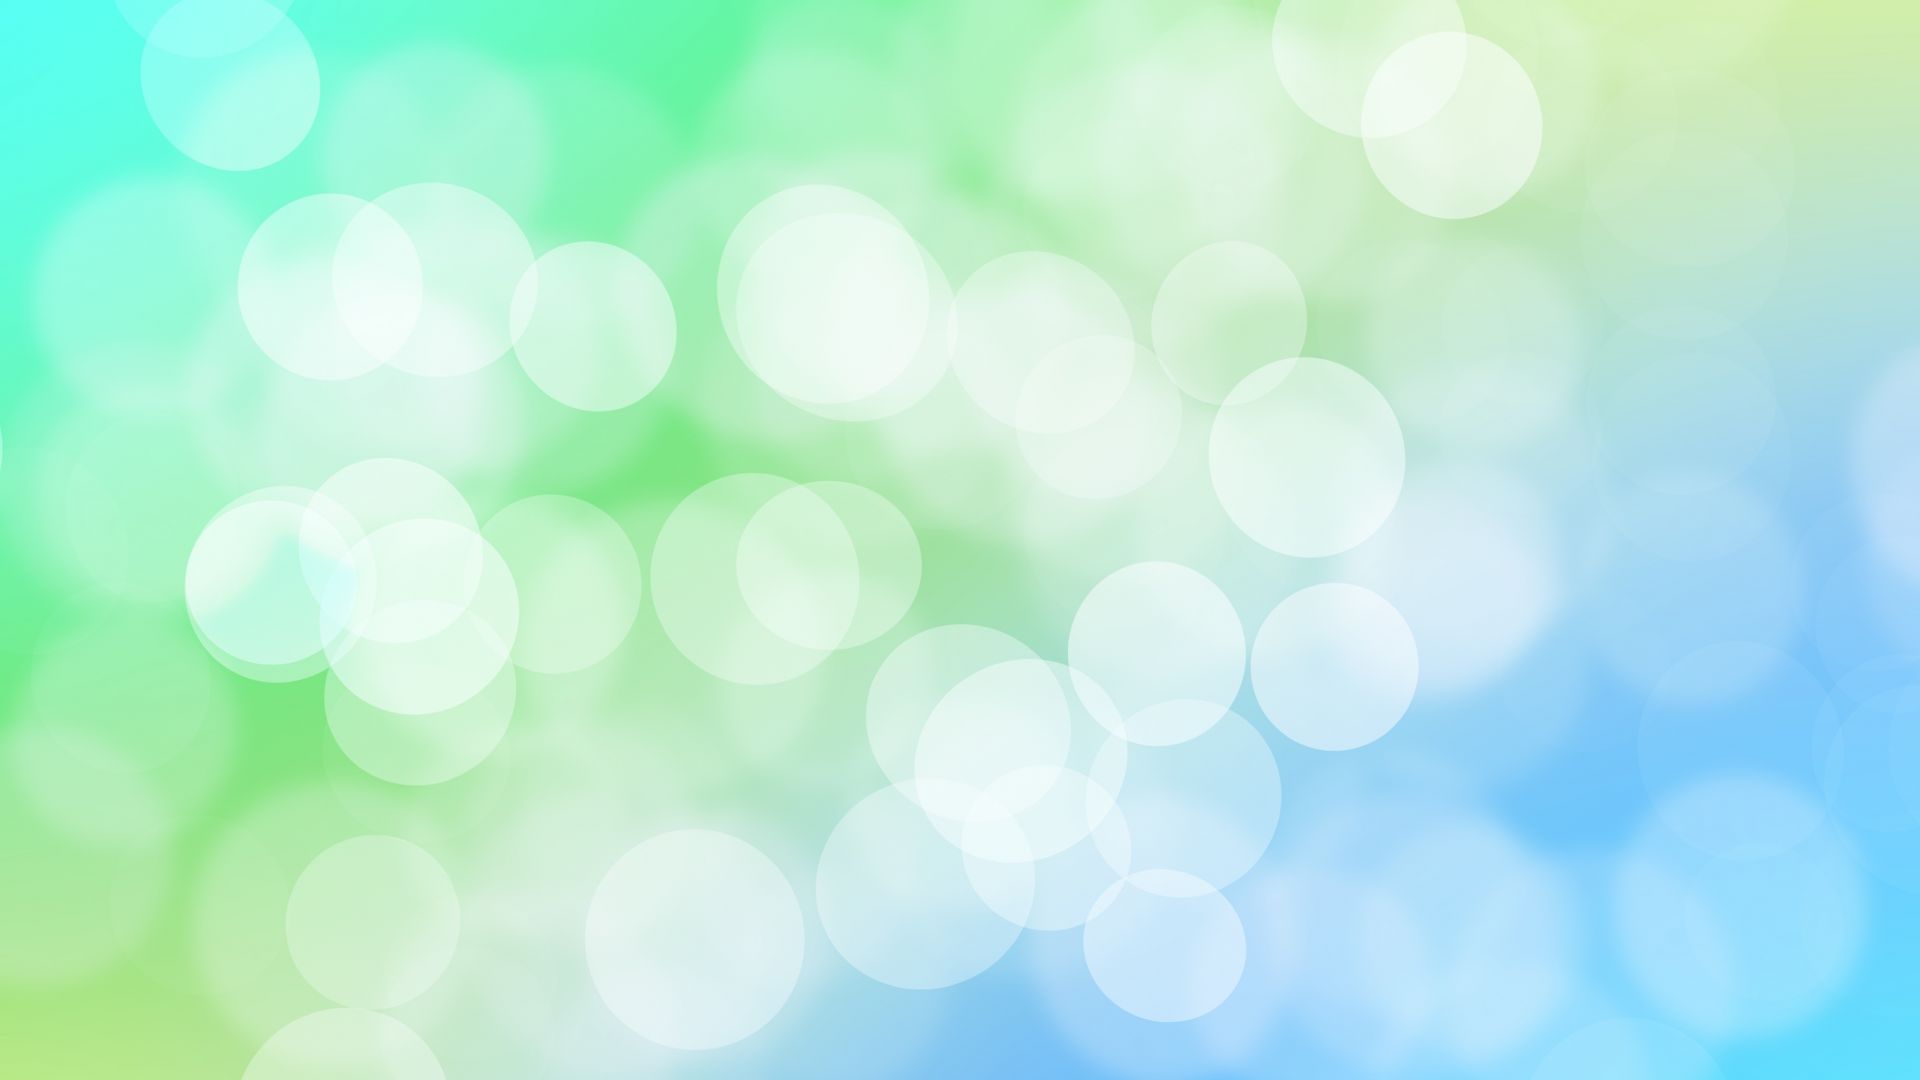 Desktop wallpaper gradient, bokeh, abstract, blue green, HD image, picture, background, b4be94